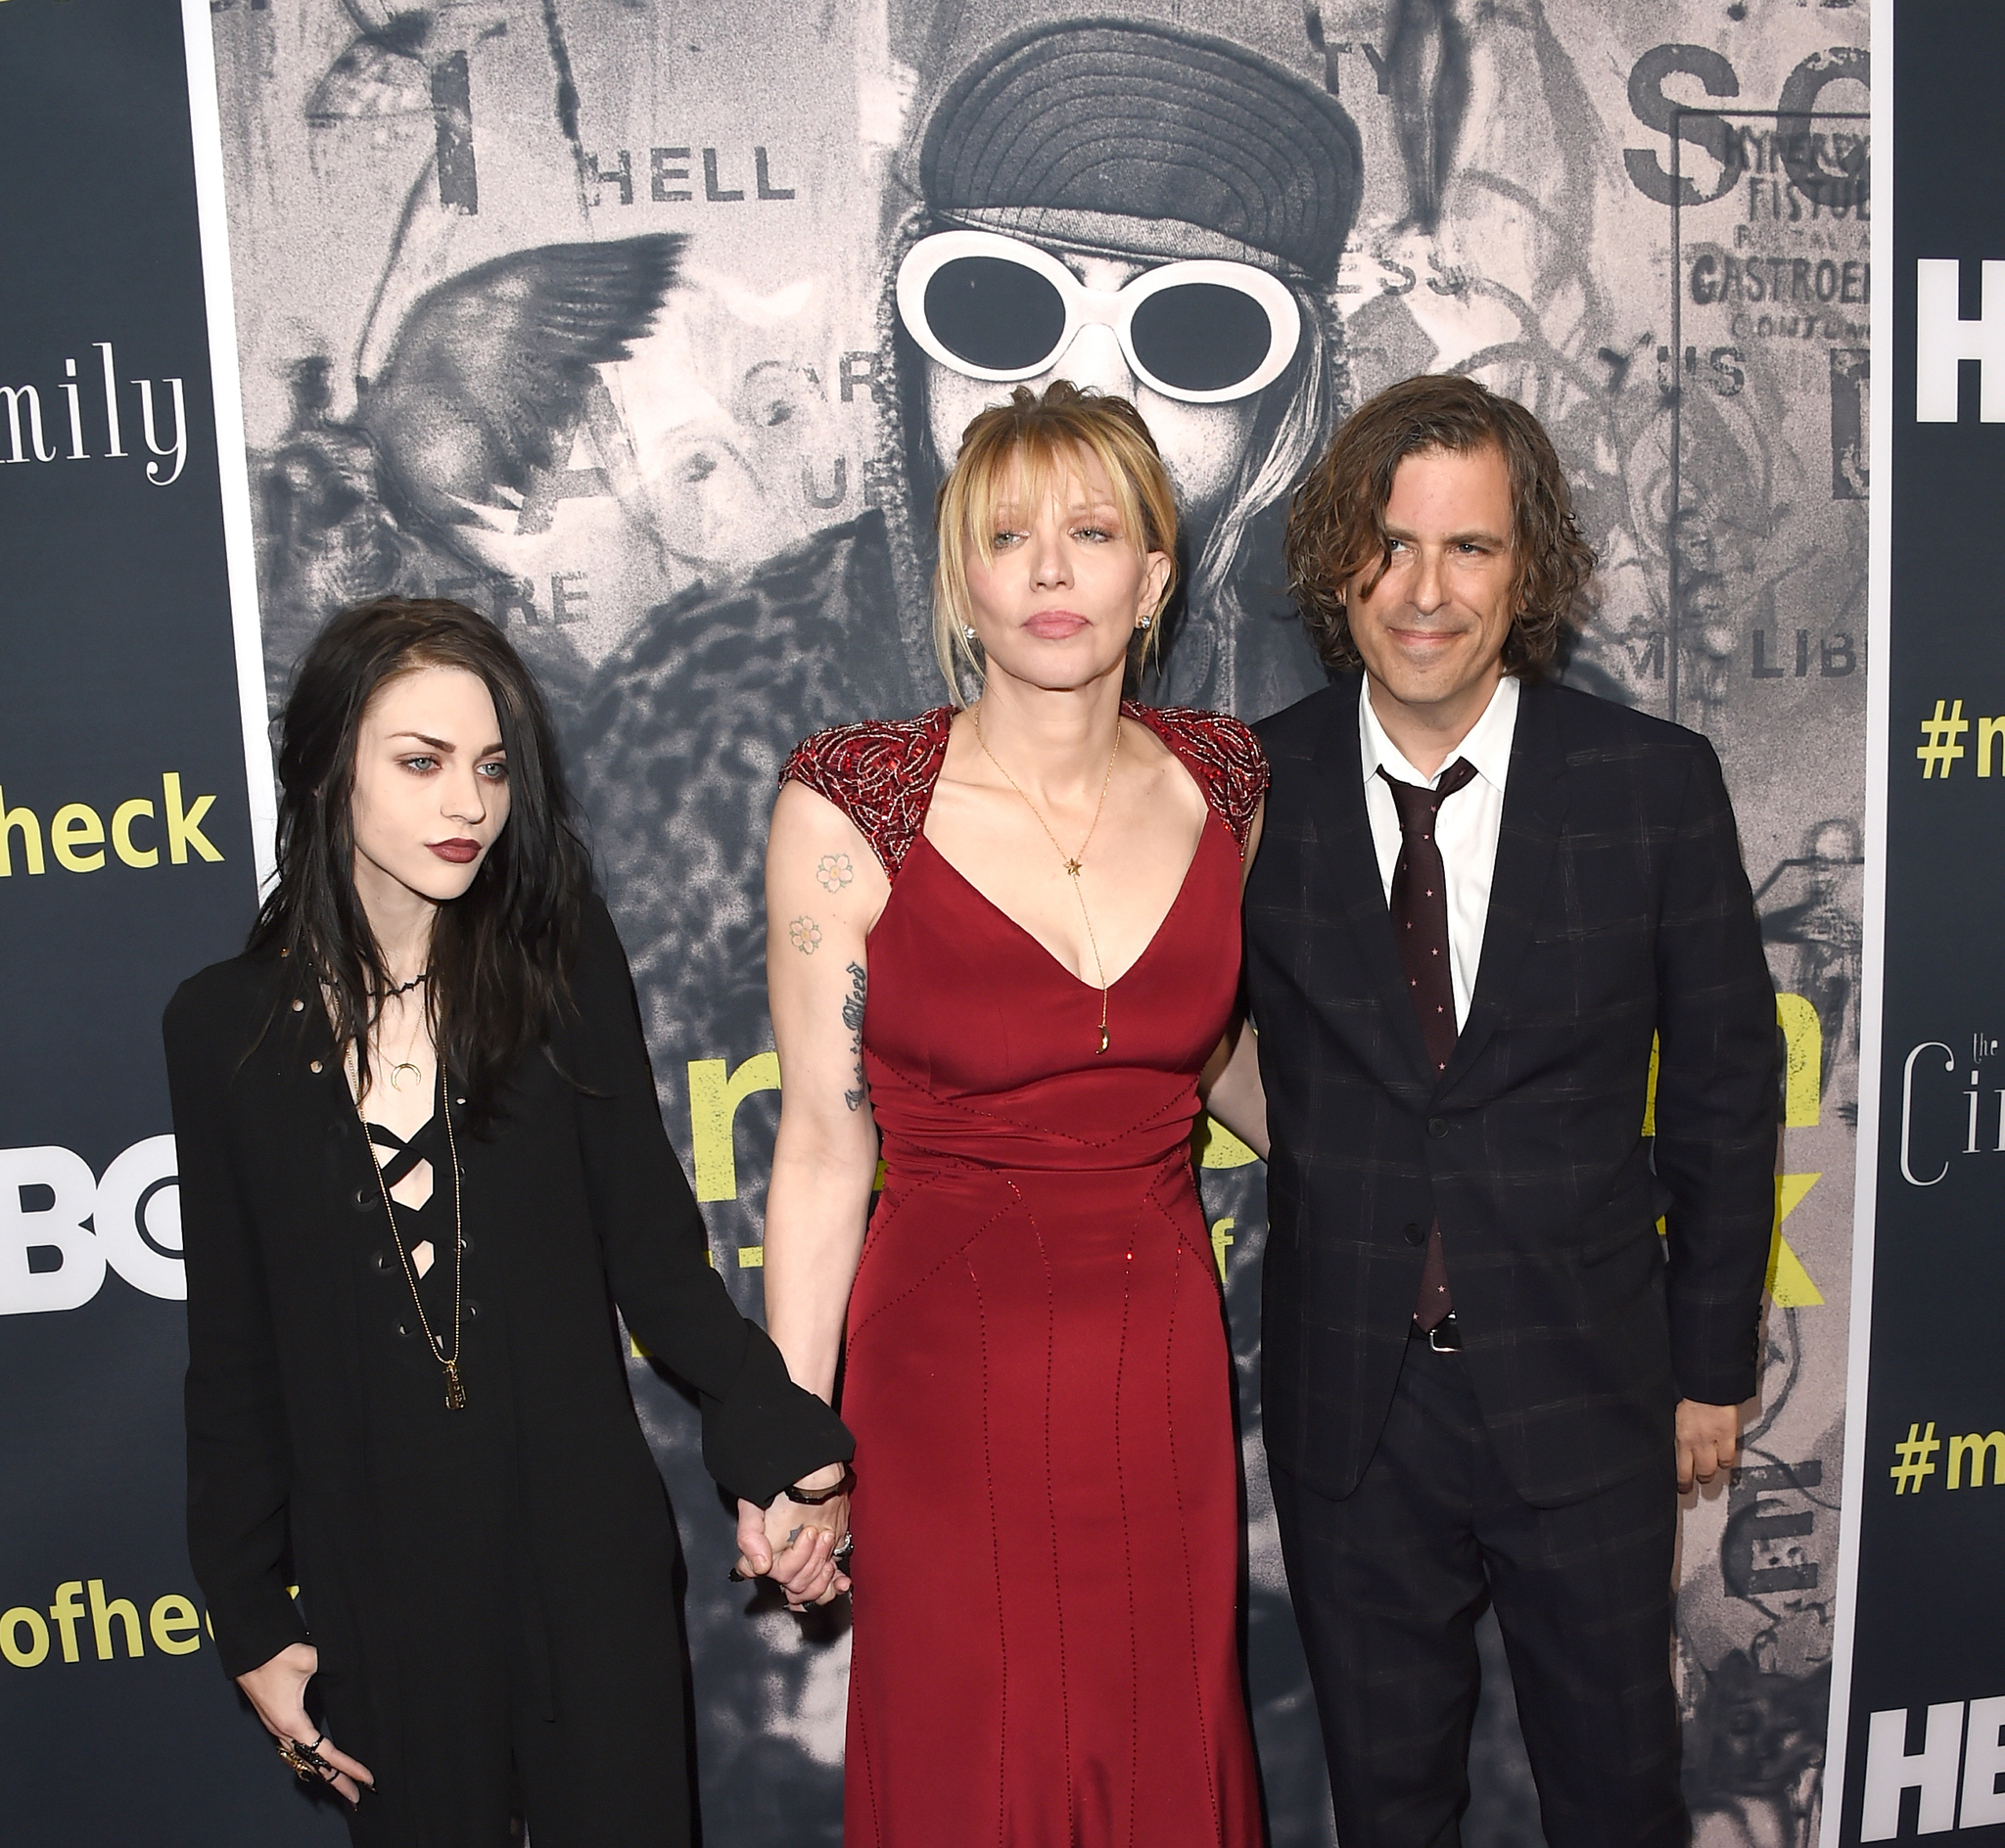 Courtney Love, Brett Morgen and Frances Bean Cobain at event of Cobain: Montage of Heck (2015)